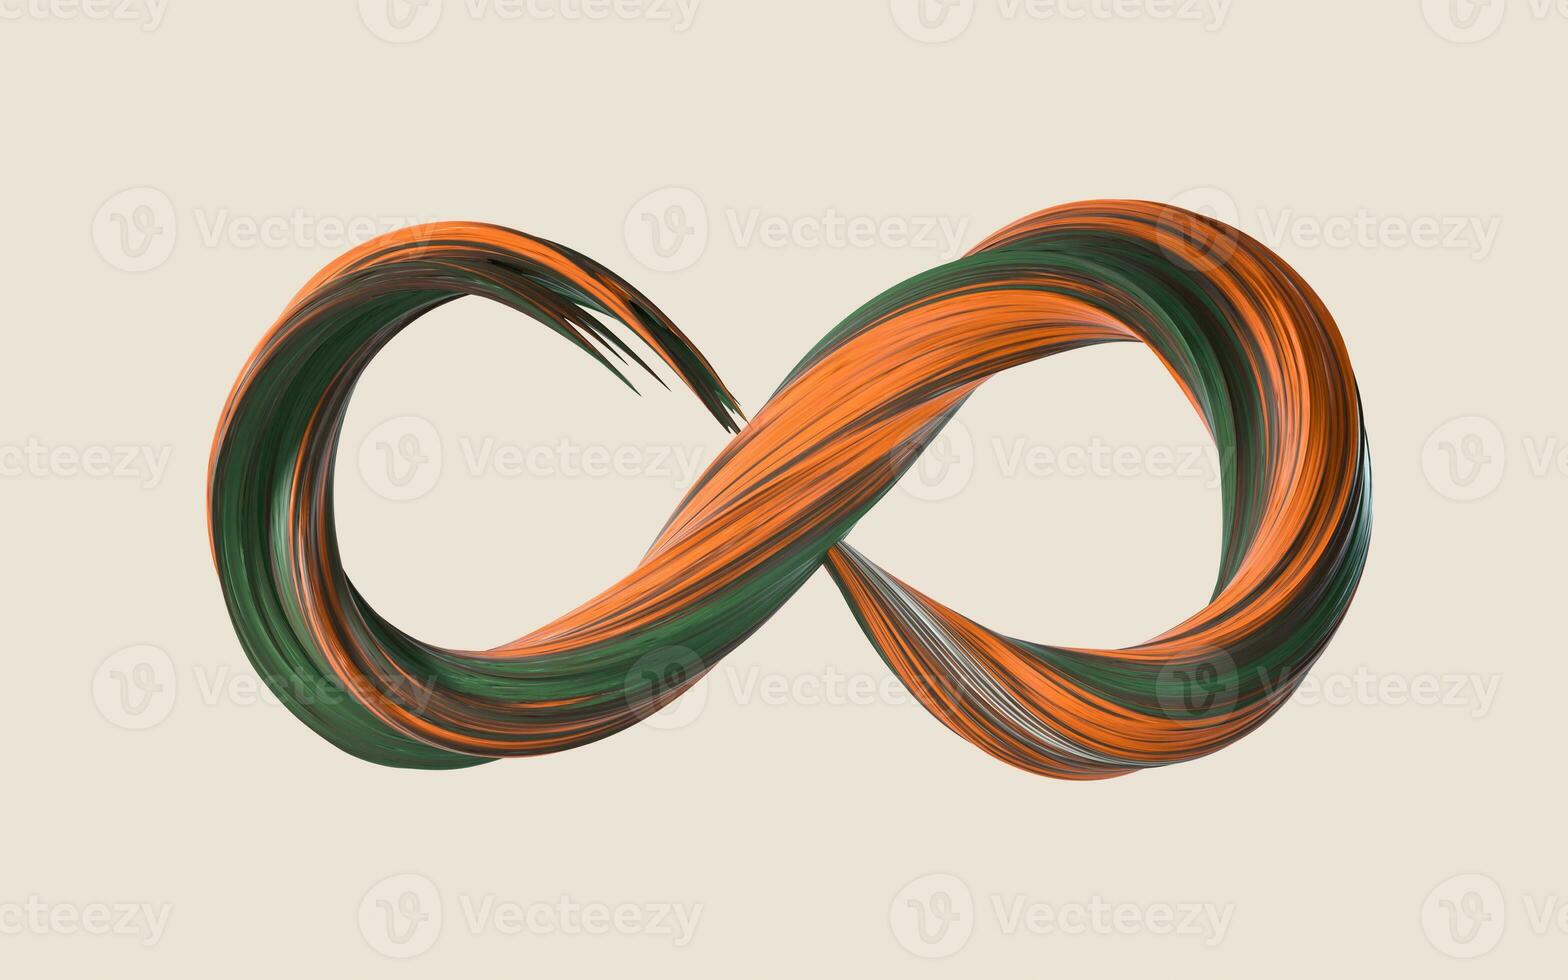 abstract lap, Mobius riem, 3d weergave. foto